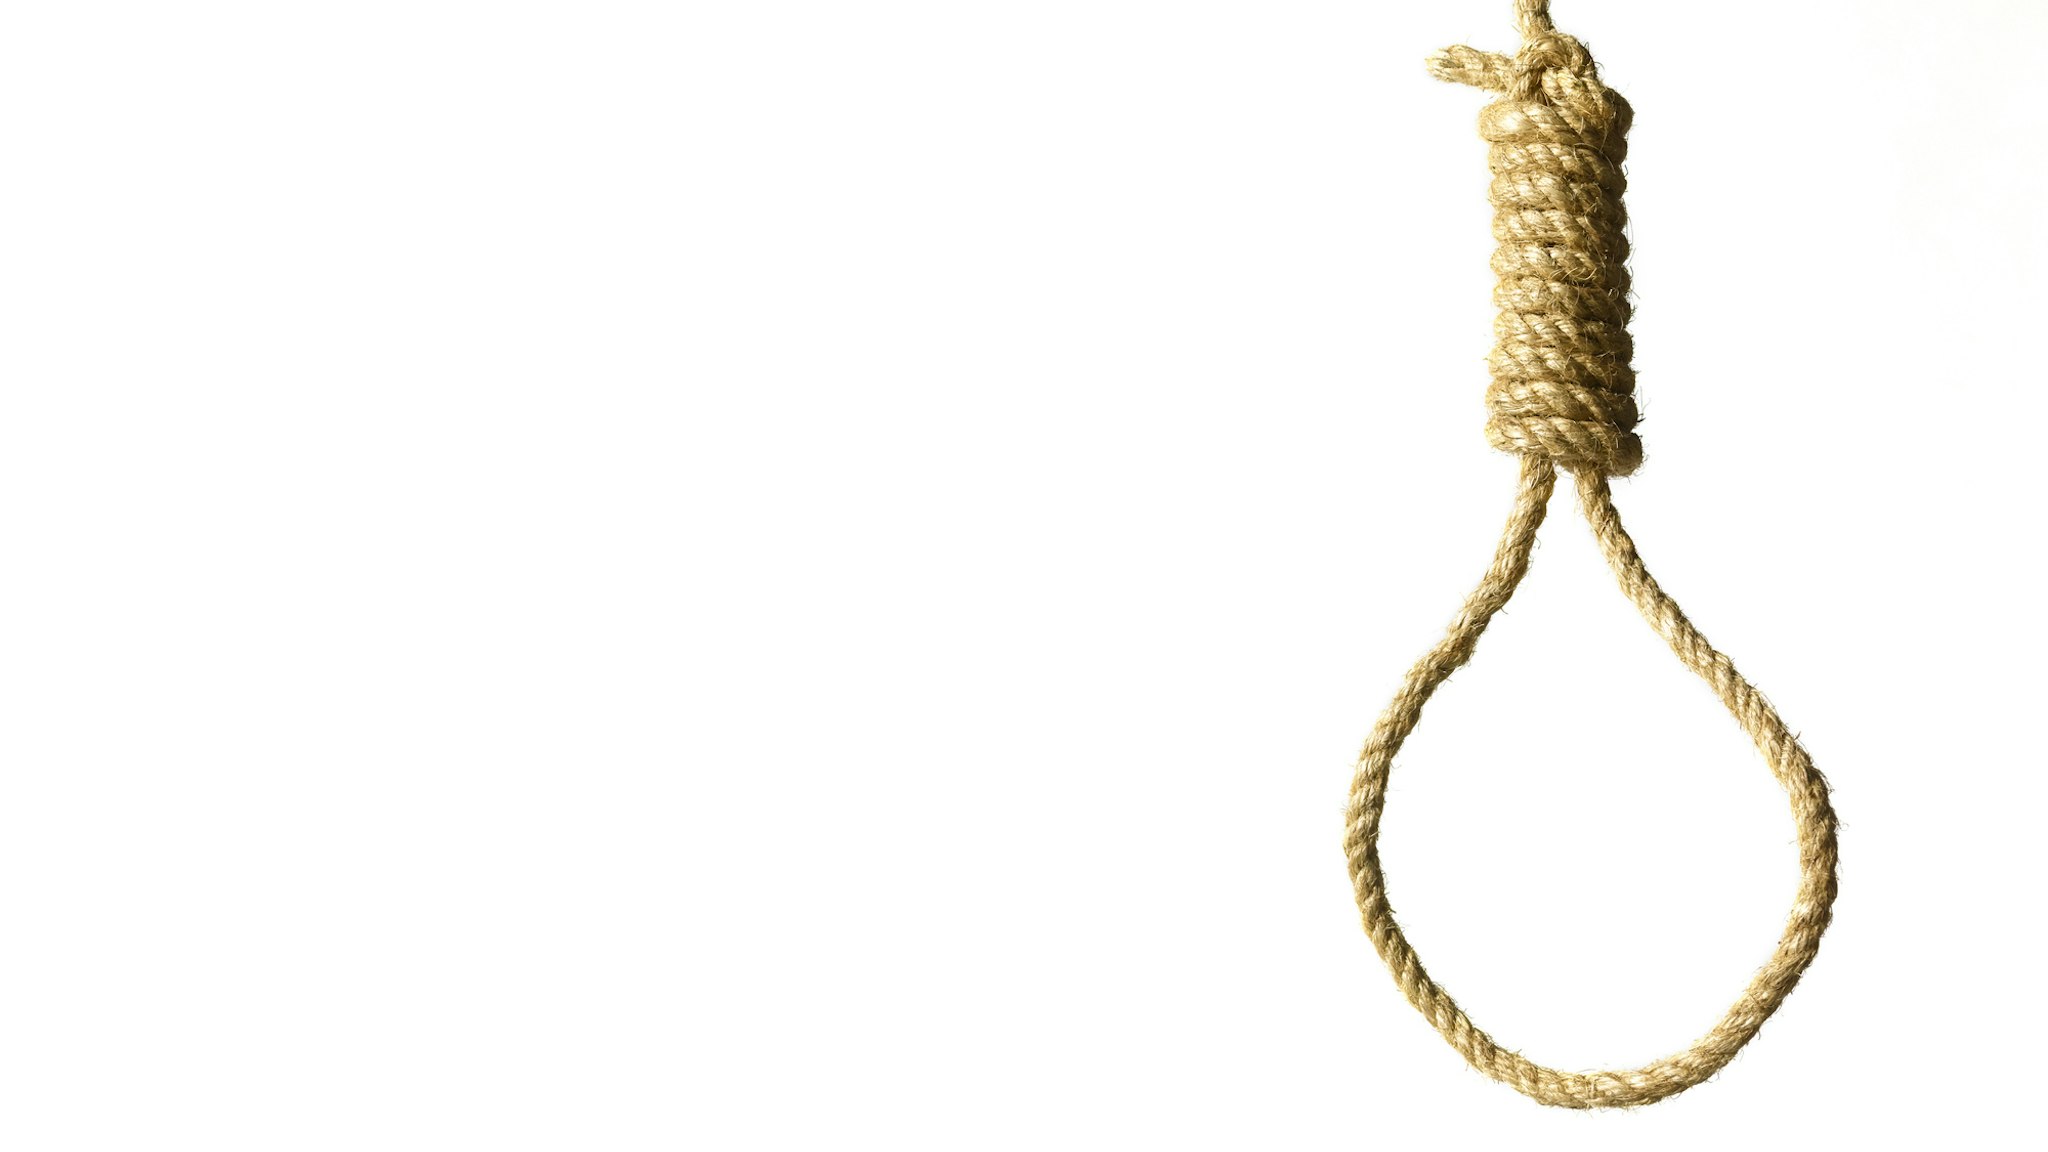 Hangman's noose on white background and copy space - stock photo